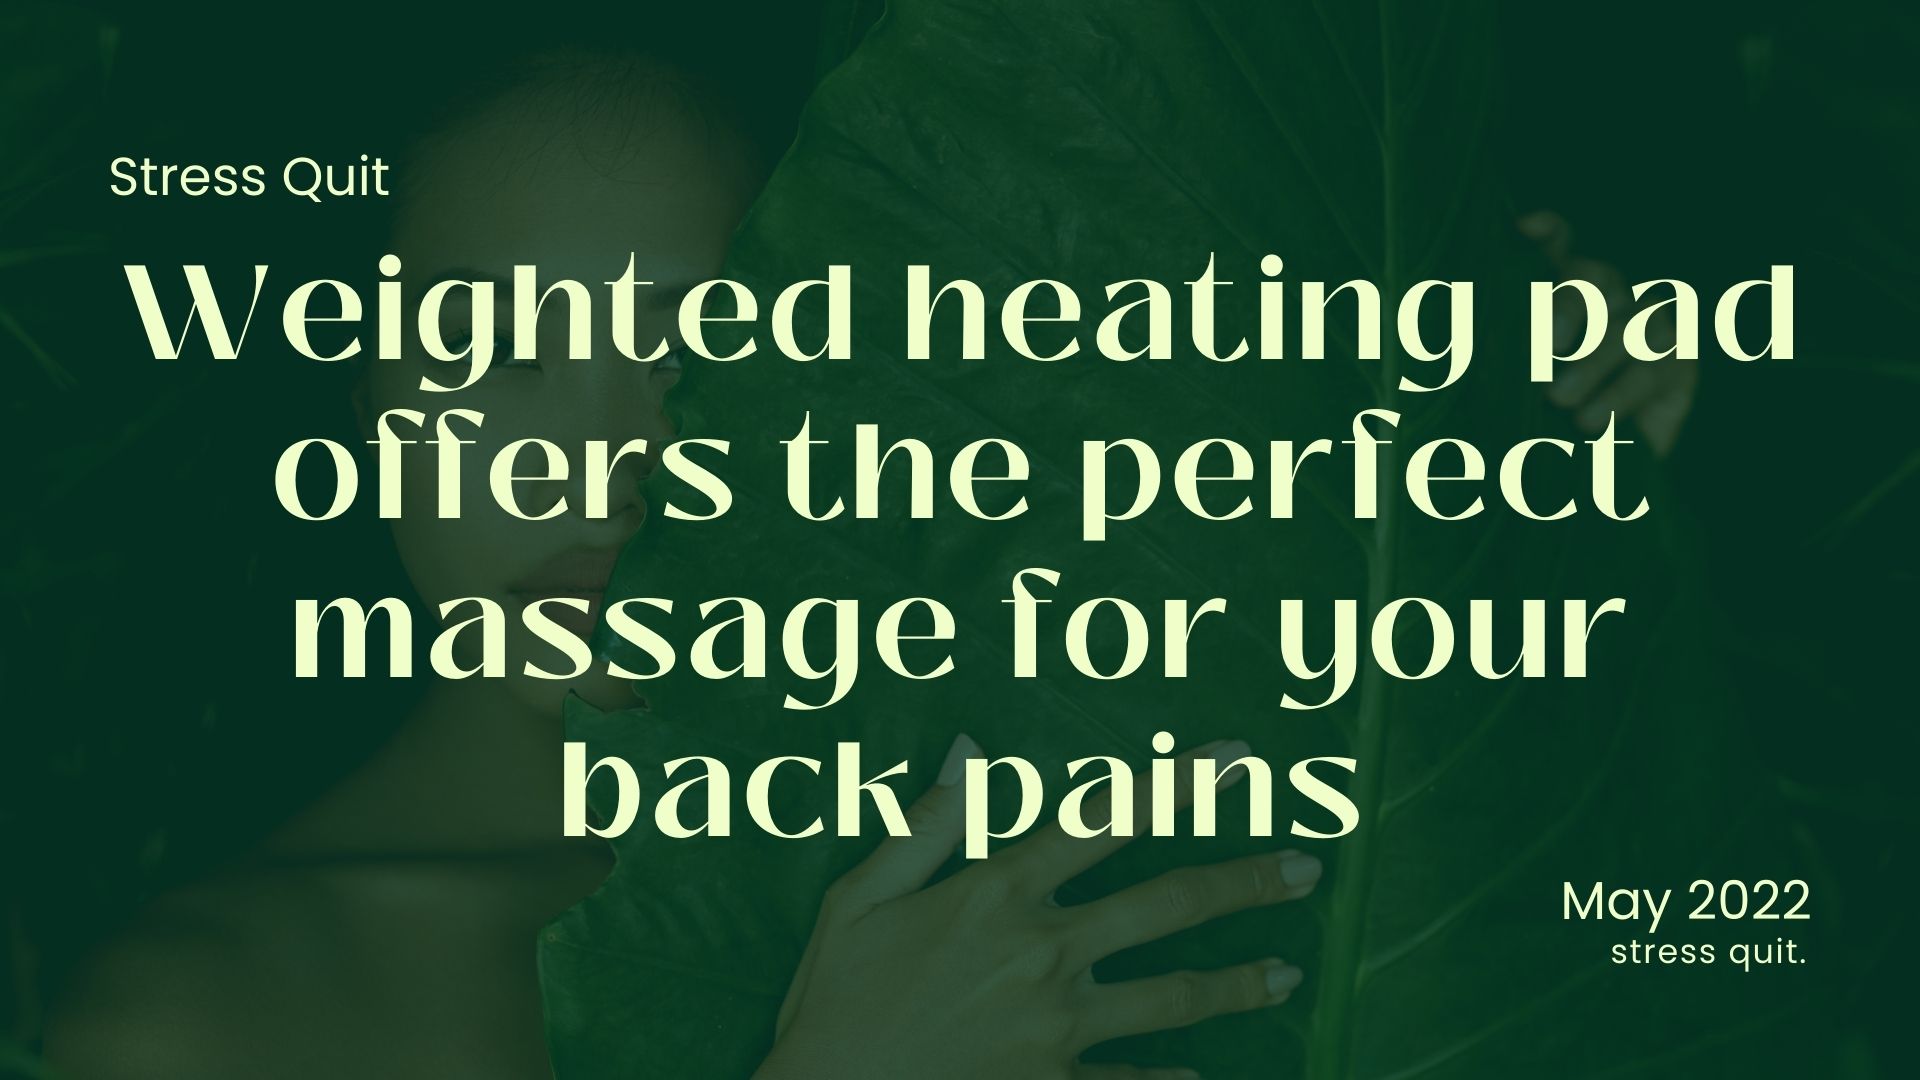 If really works Weighted heating pad offers the perfect massage for your back pains